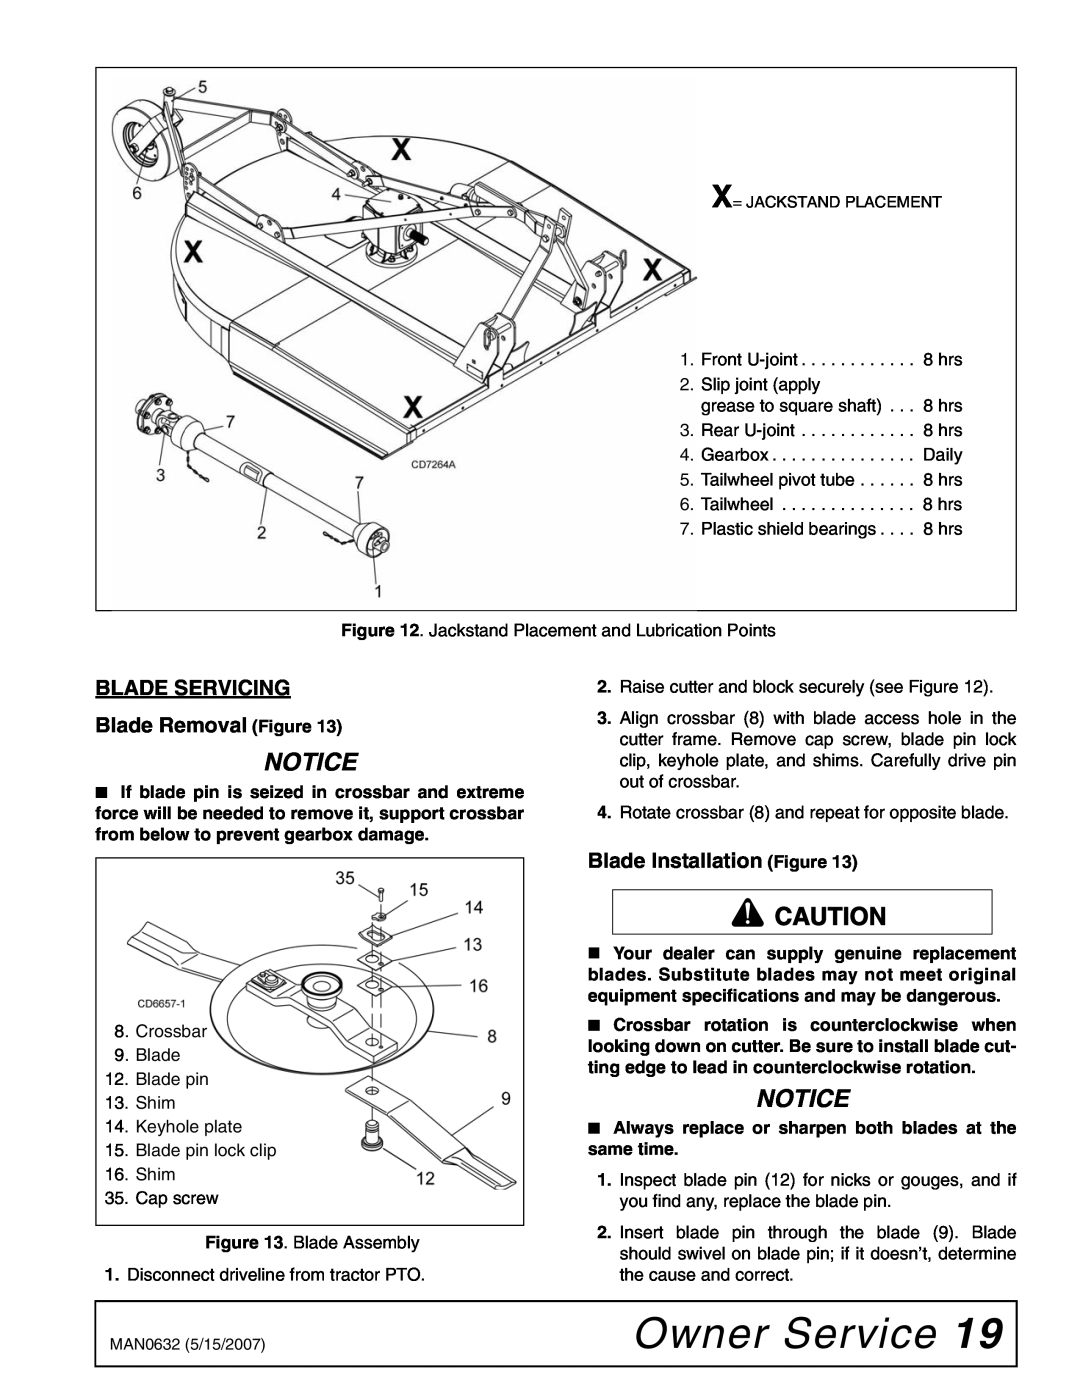 Woods Equipment BB72X, BB48X, BB84X Owner Service, Notice, BLADE SERVICING Blade Removal Figure, Blade Installation Figure 